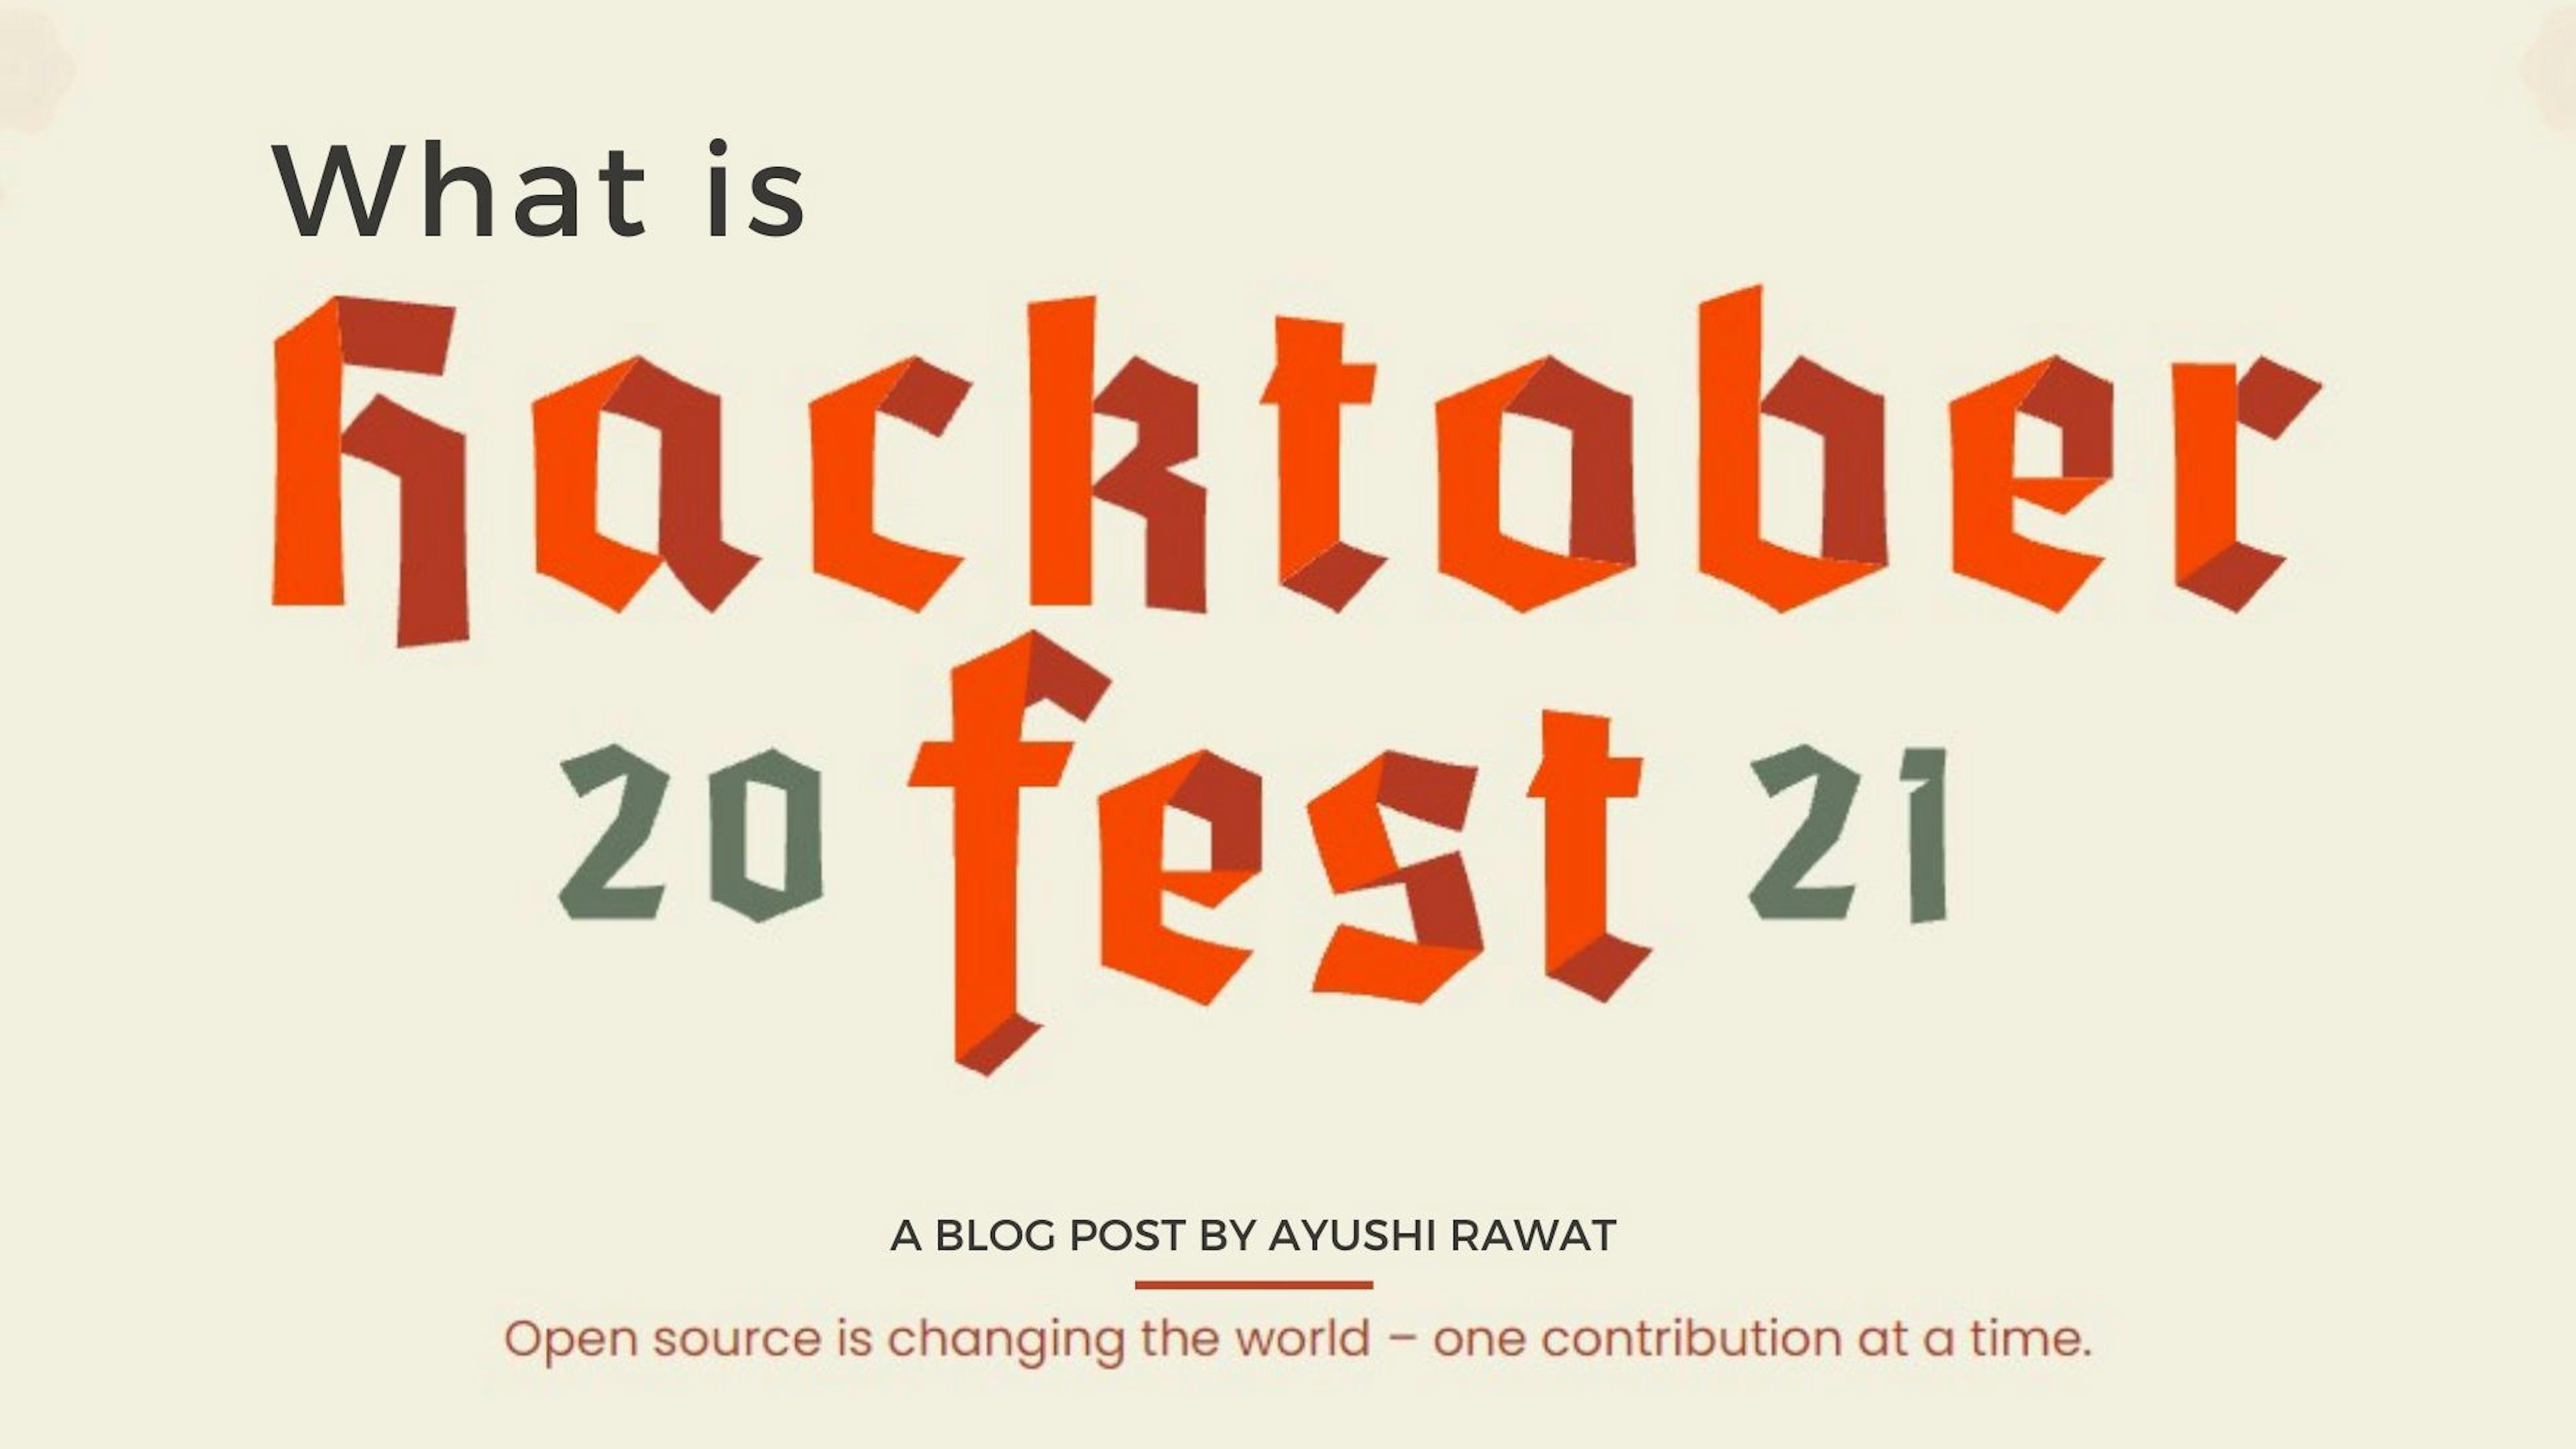 featured image - Hacktoberfest 2021: Everything You Need to Know